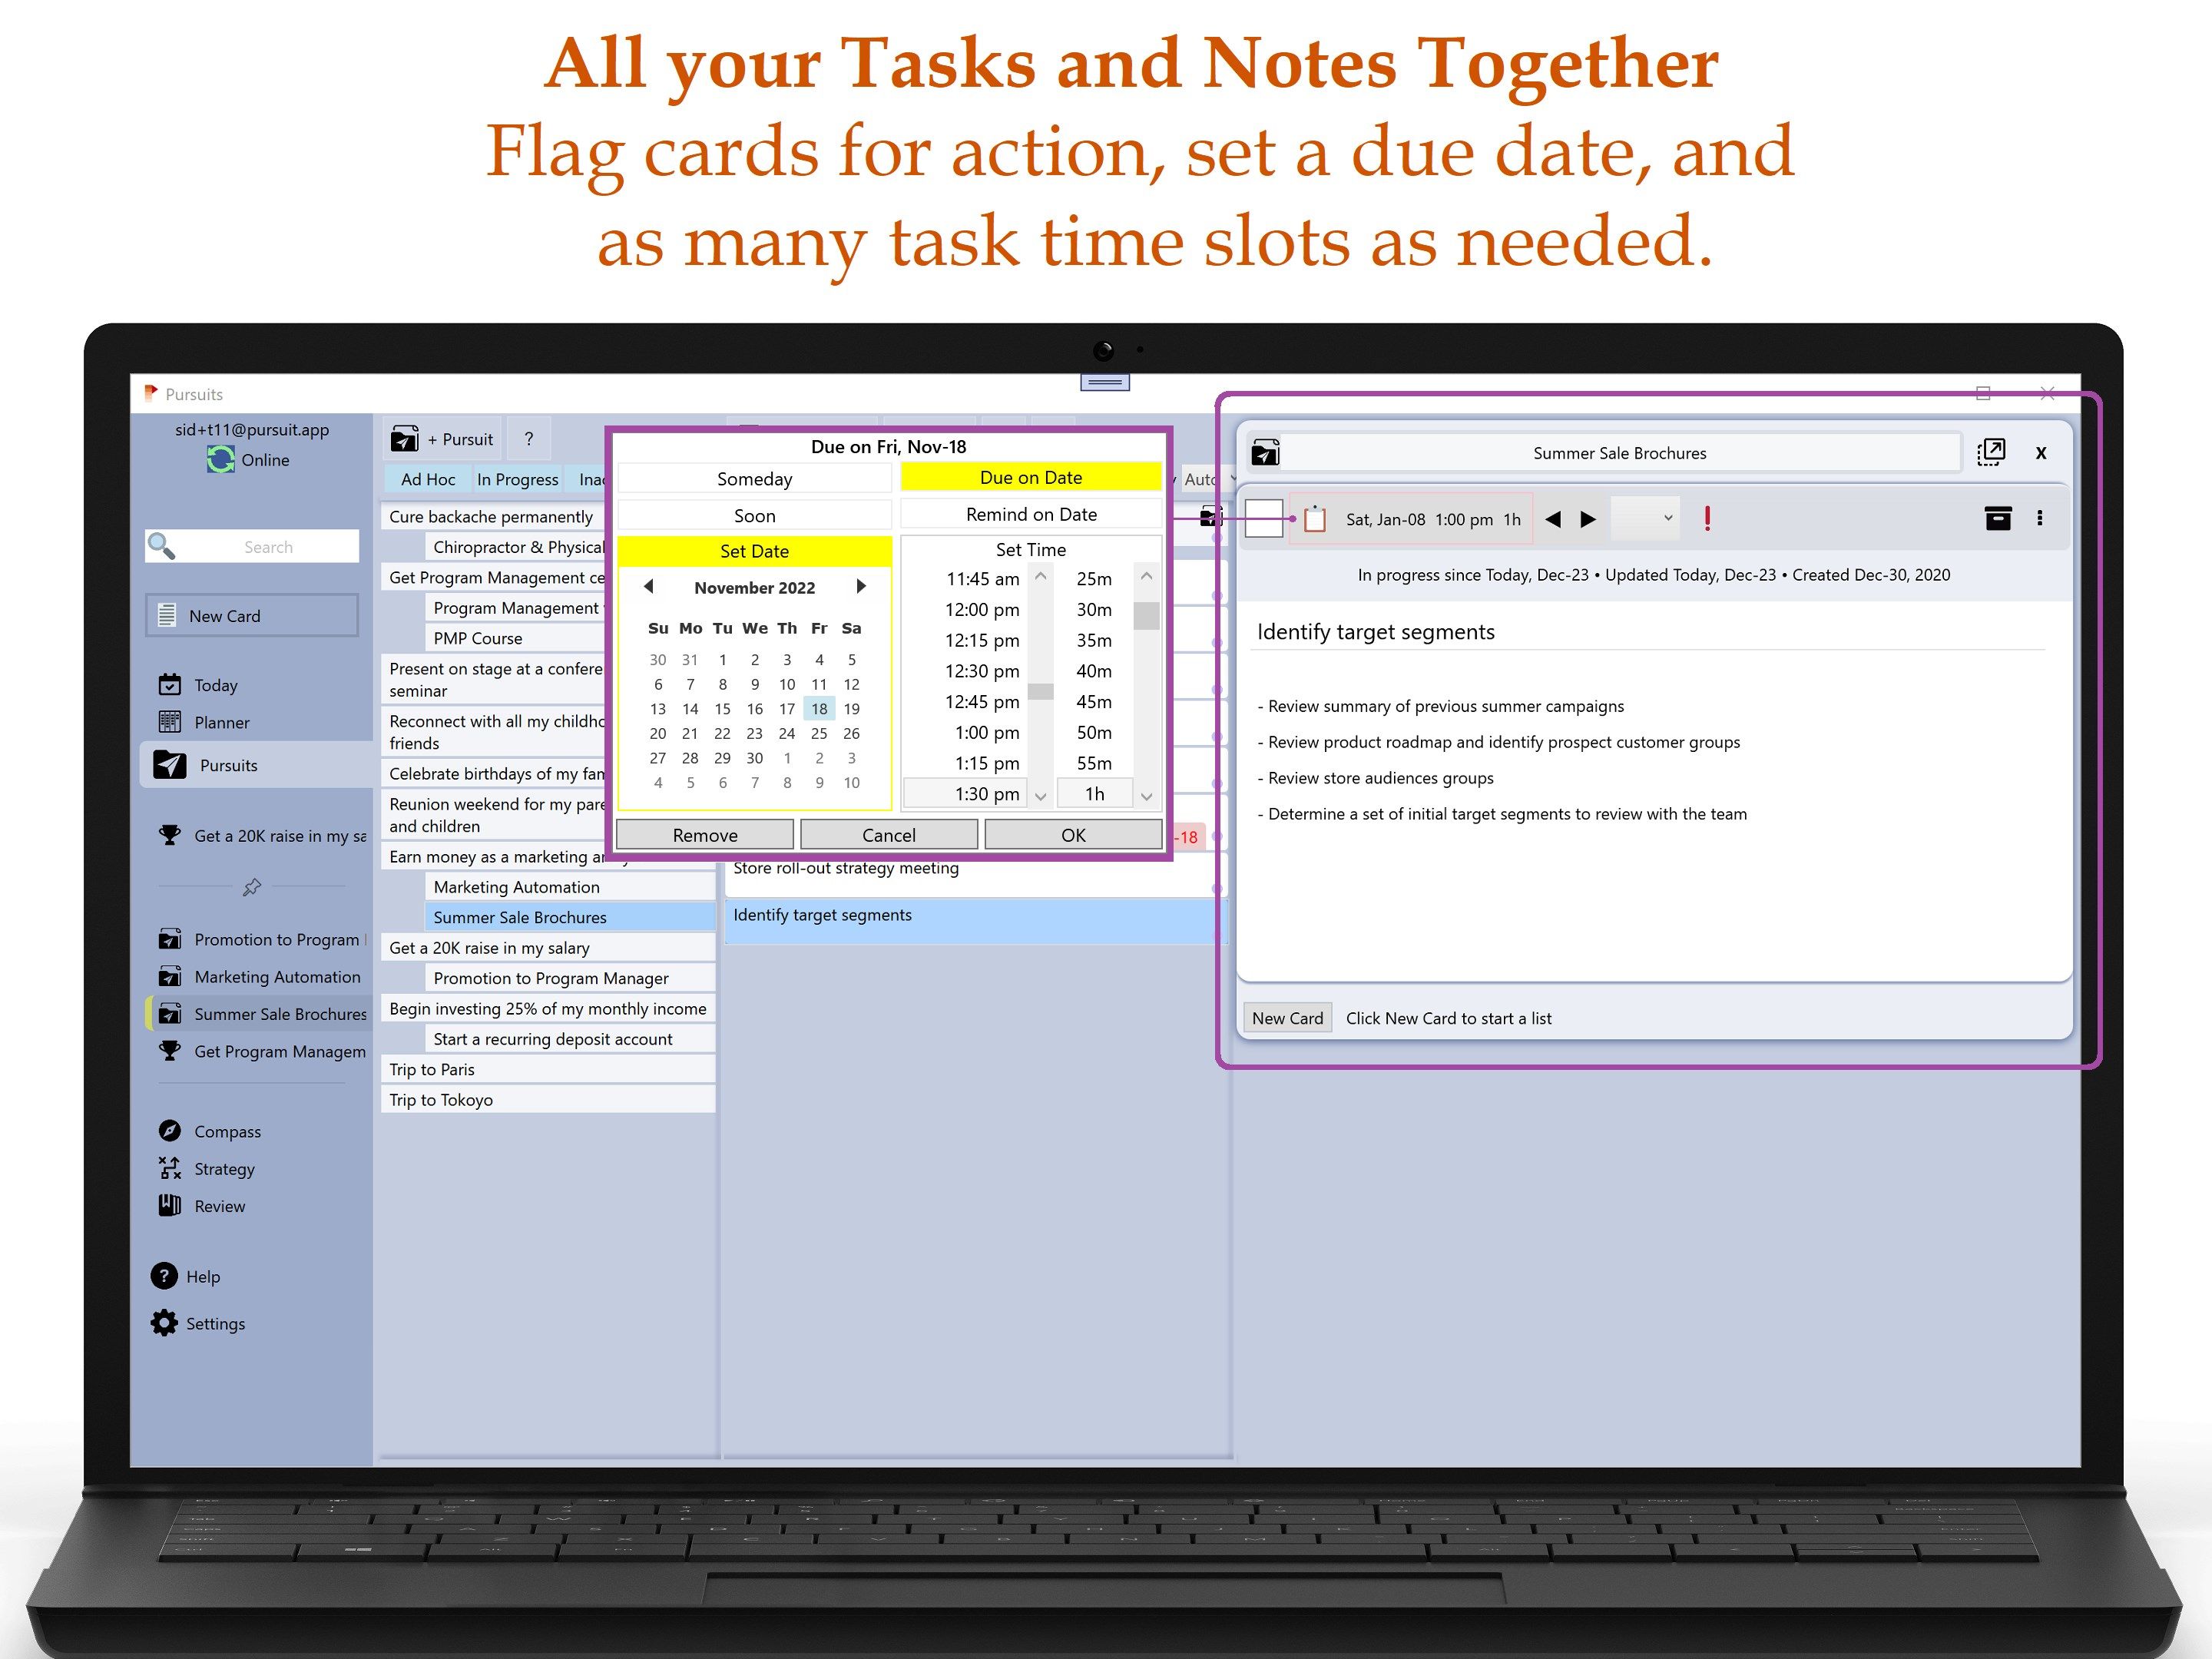 All your Tasks and Notes Together: Flag cards for action, set a due date, and as many task time slots as needed.